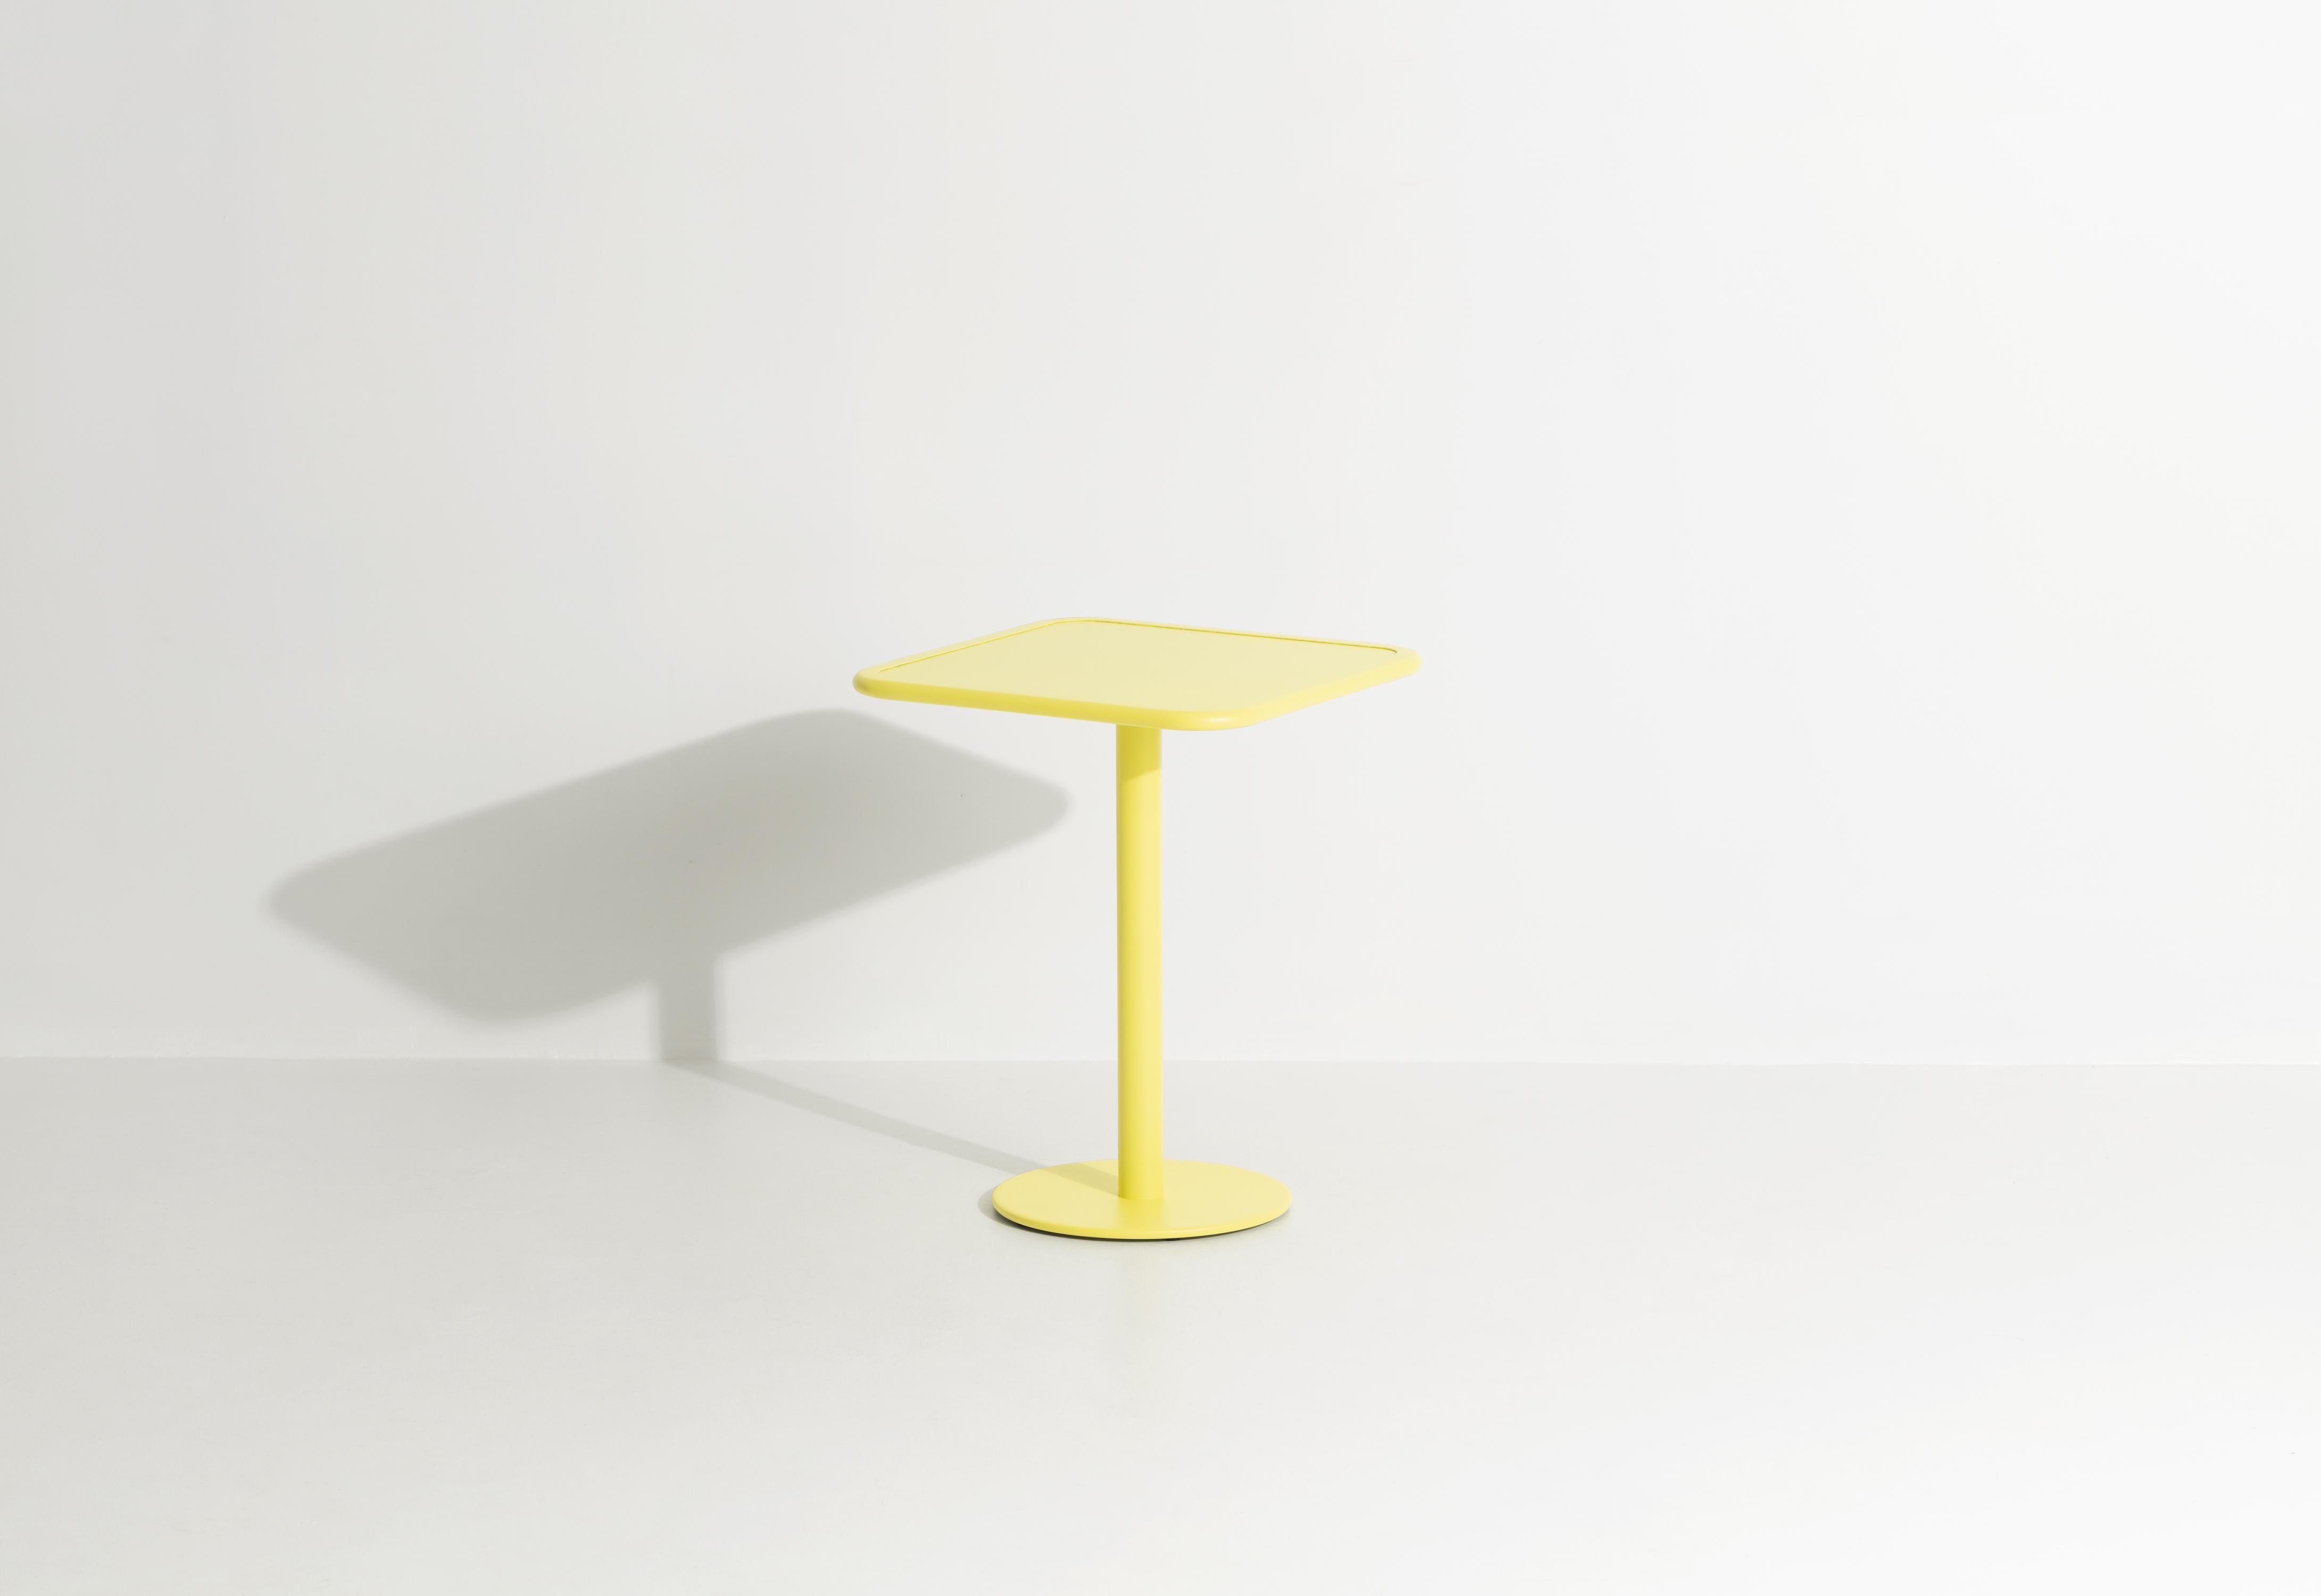 Chinese Petite Friture Week-End Bistro Square Dining Table in Yellow Aluminium, 2017 For Sale